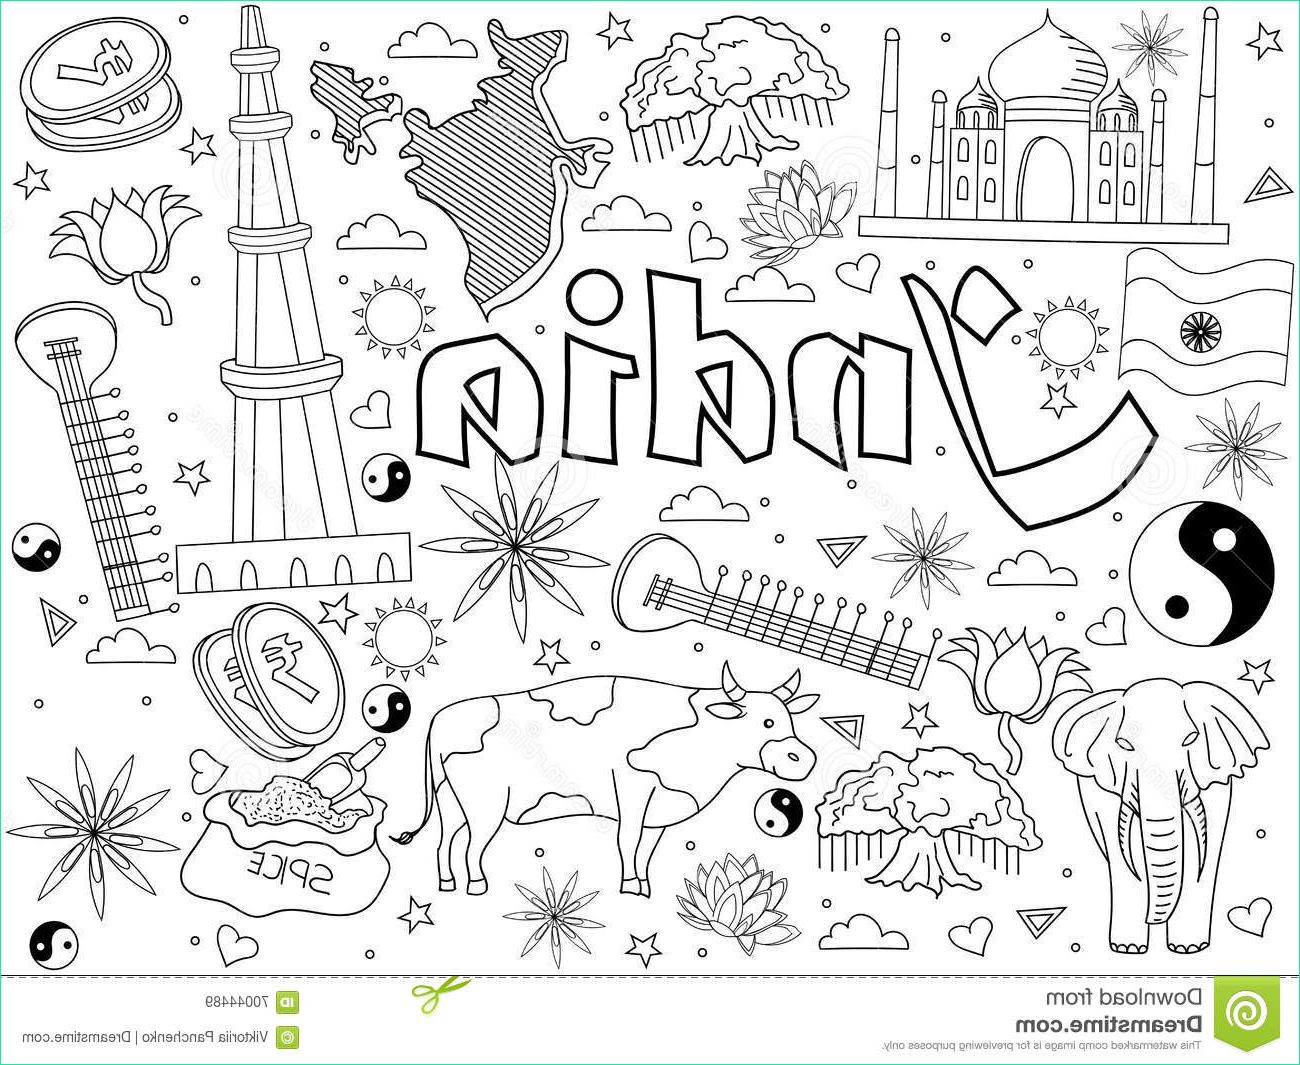 stock illustration india coloring book vector illustration line art design separate objects hand drawn doodle design elements image